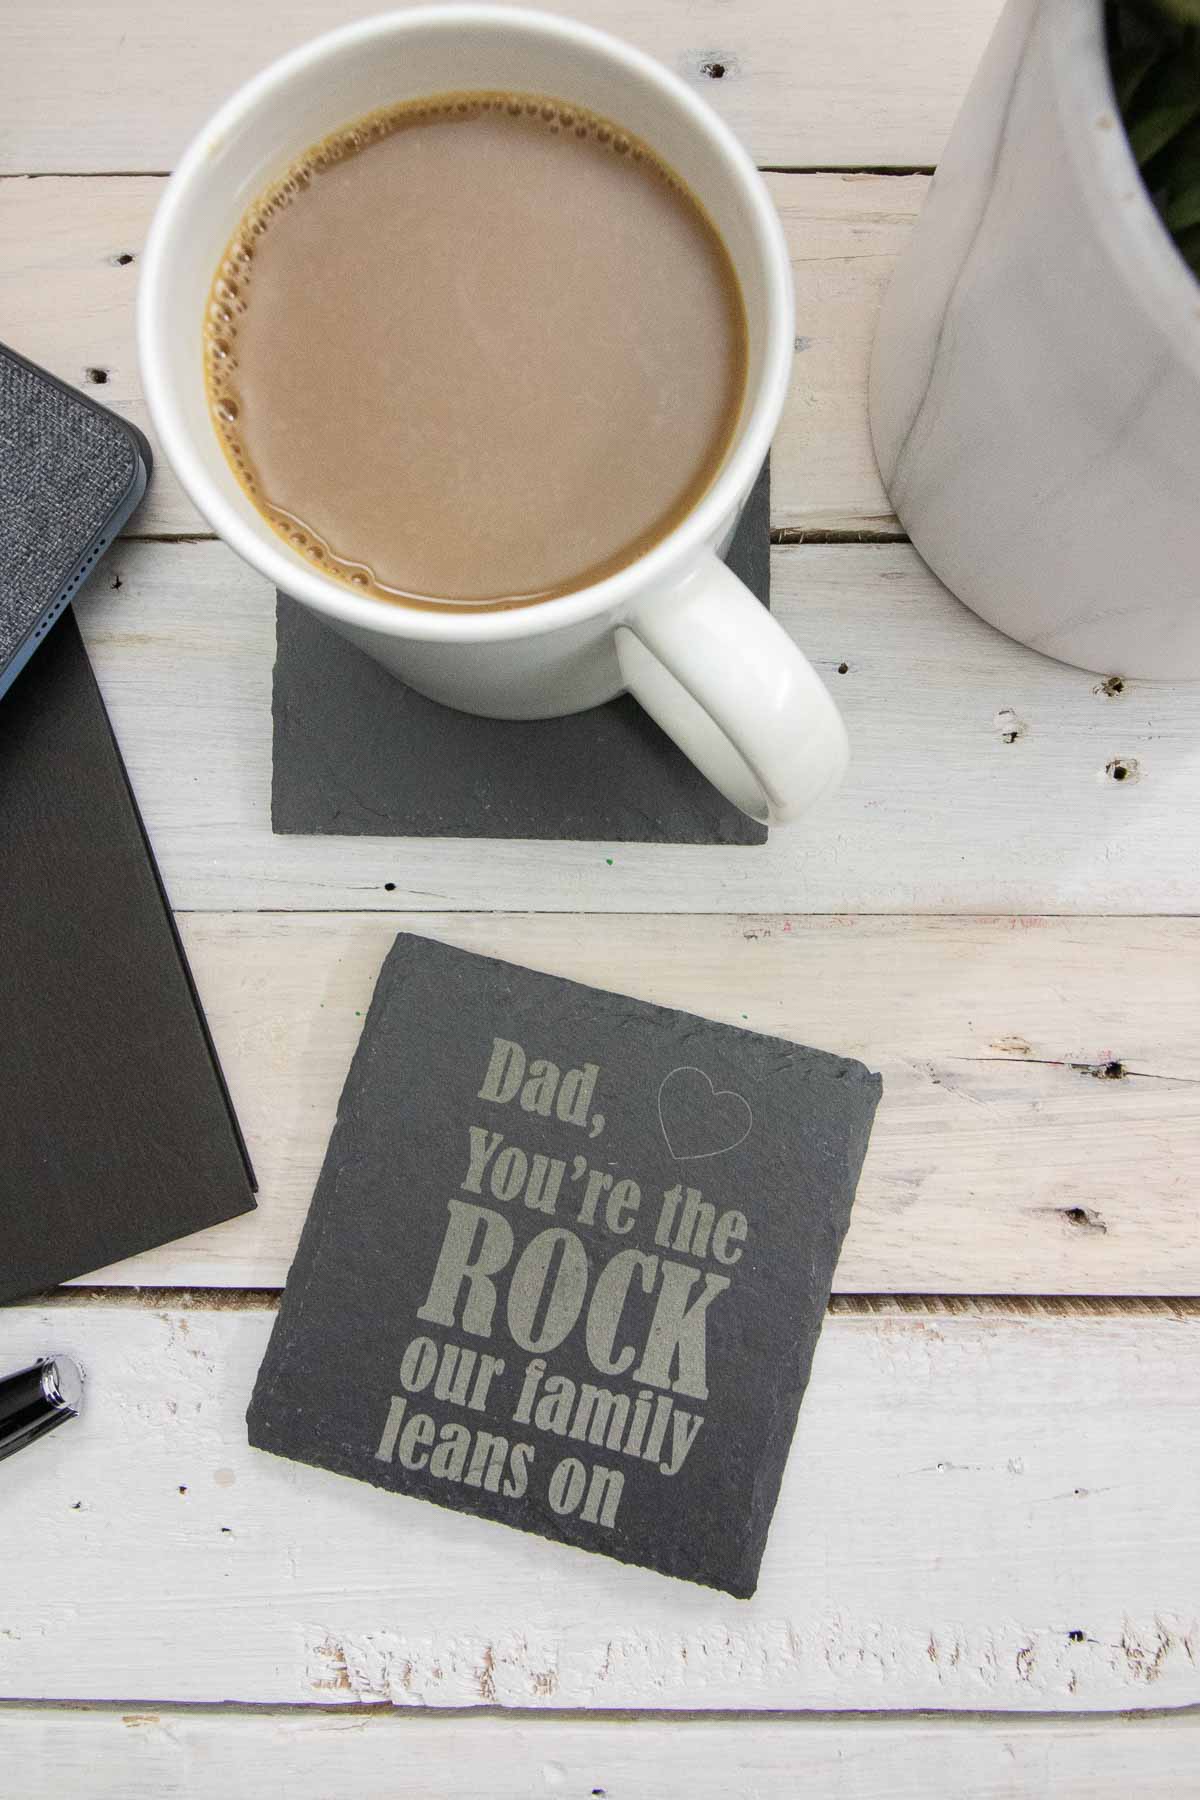 Engraved slate coaster that reads "Dad You're the Rock our Family Leans on" next to a coffee mug.